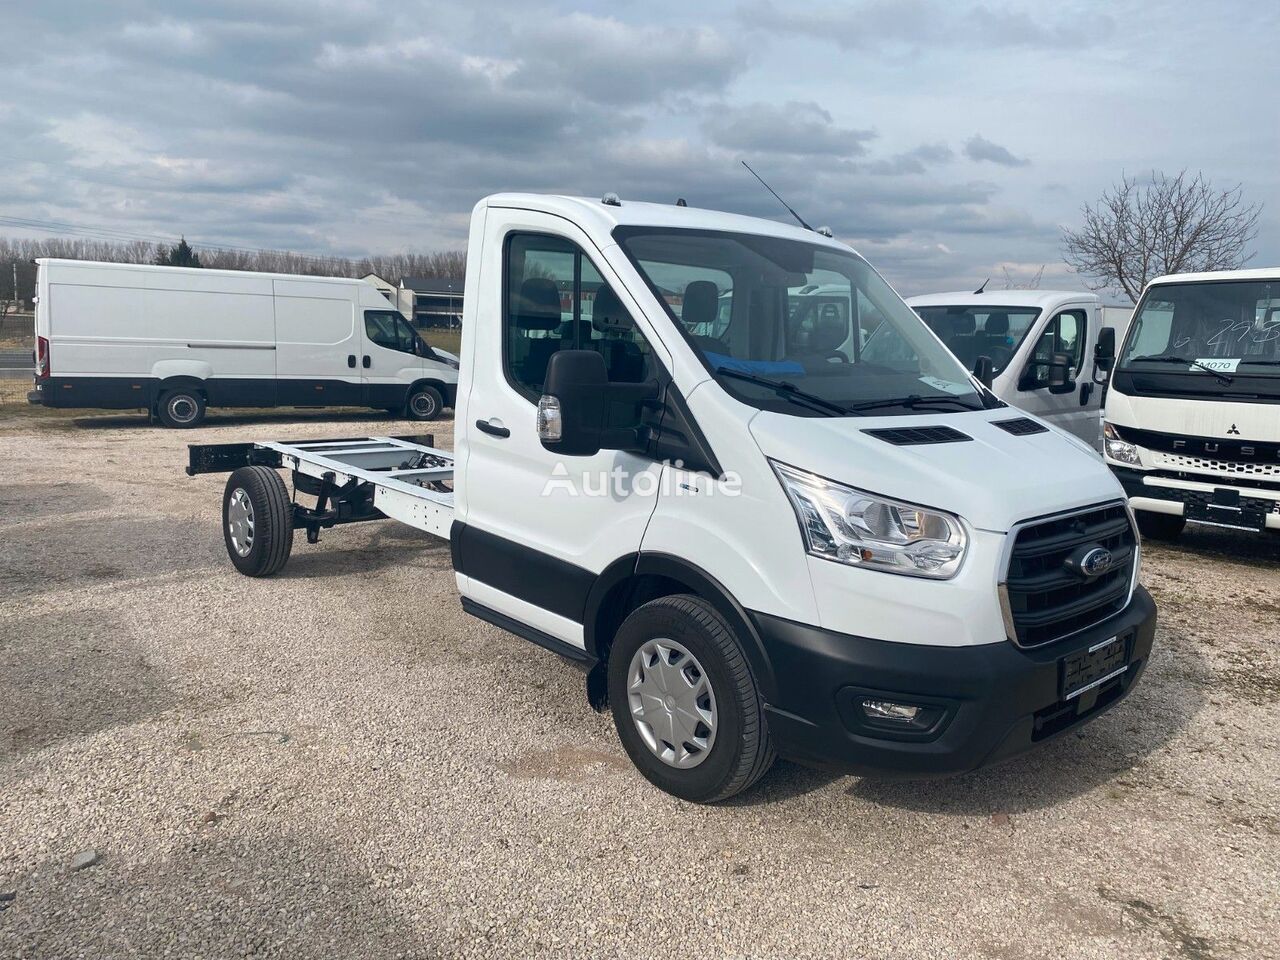 Ford Transit L3H1 Chassis SC Trend Fahrgestelle 2.0 camión chasis nuevo